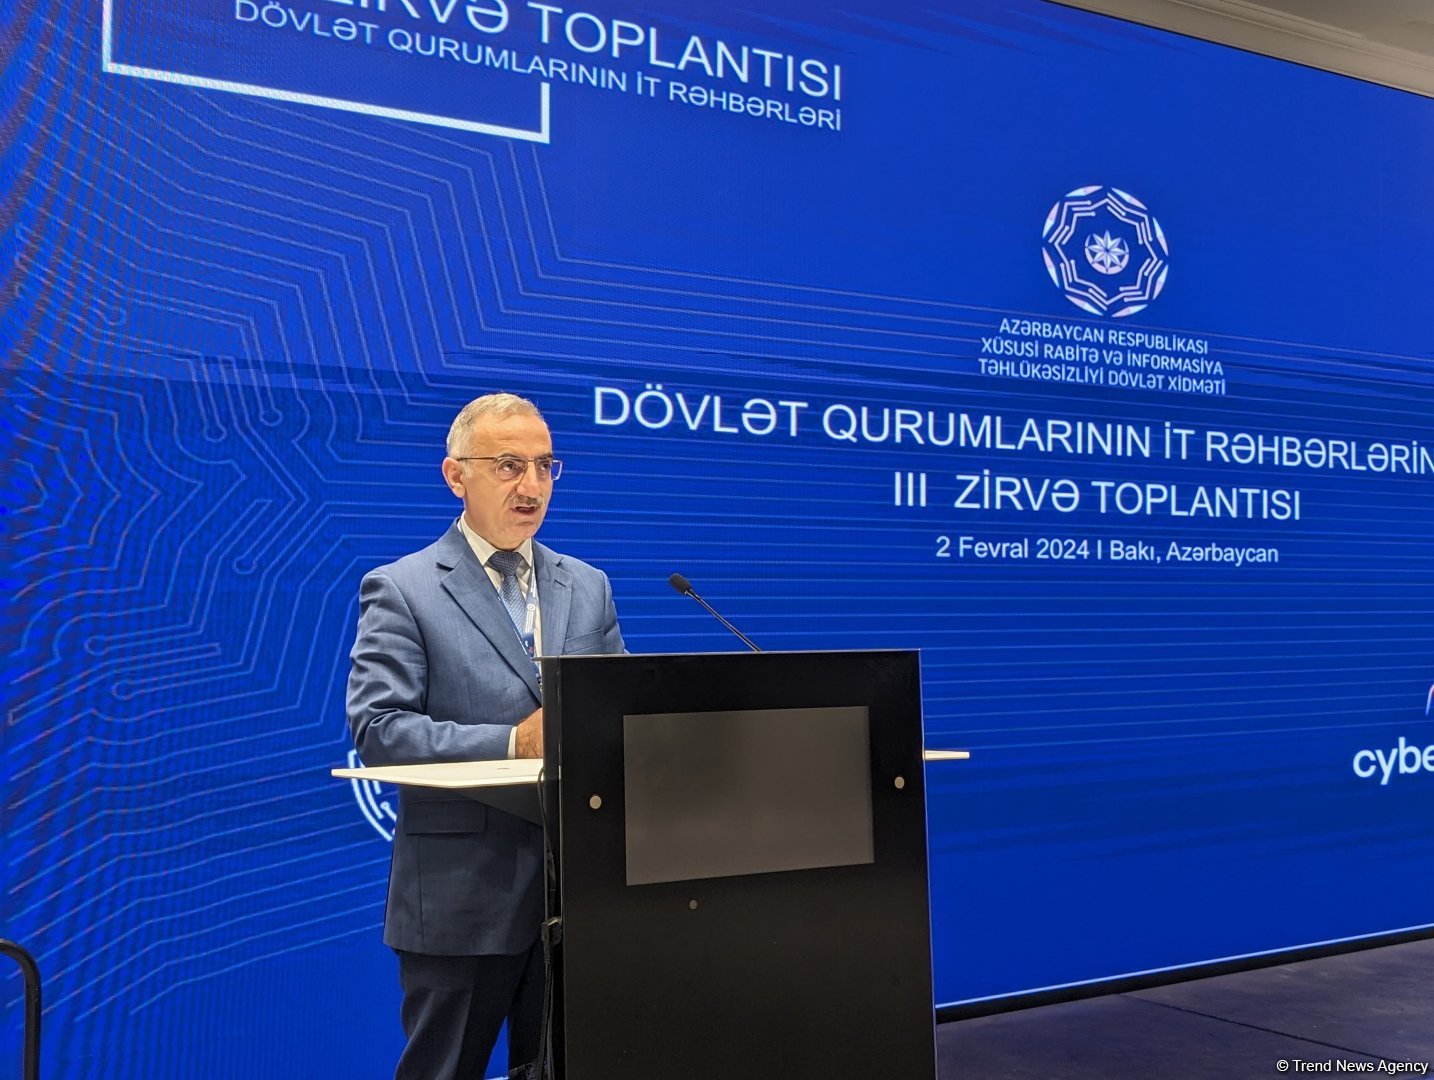 Adoption of cybersecurity strategy in Azerbaijan implies hefty achievement, official says